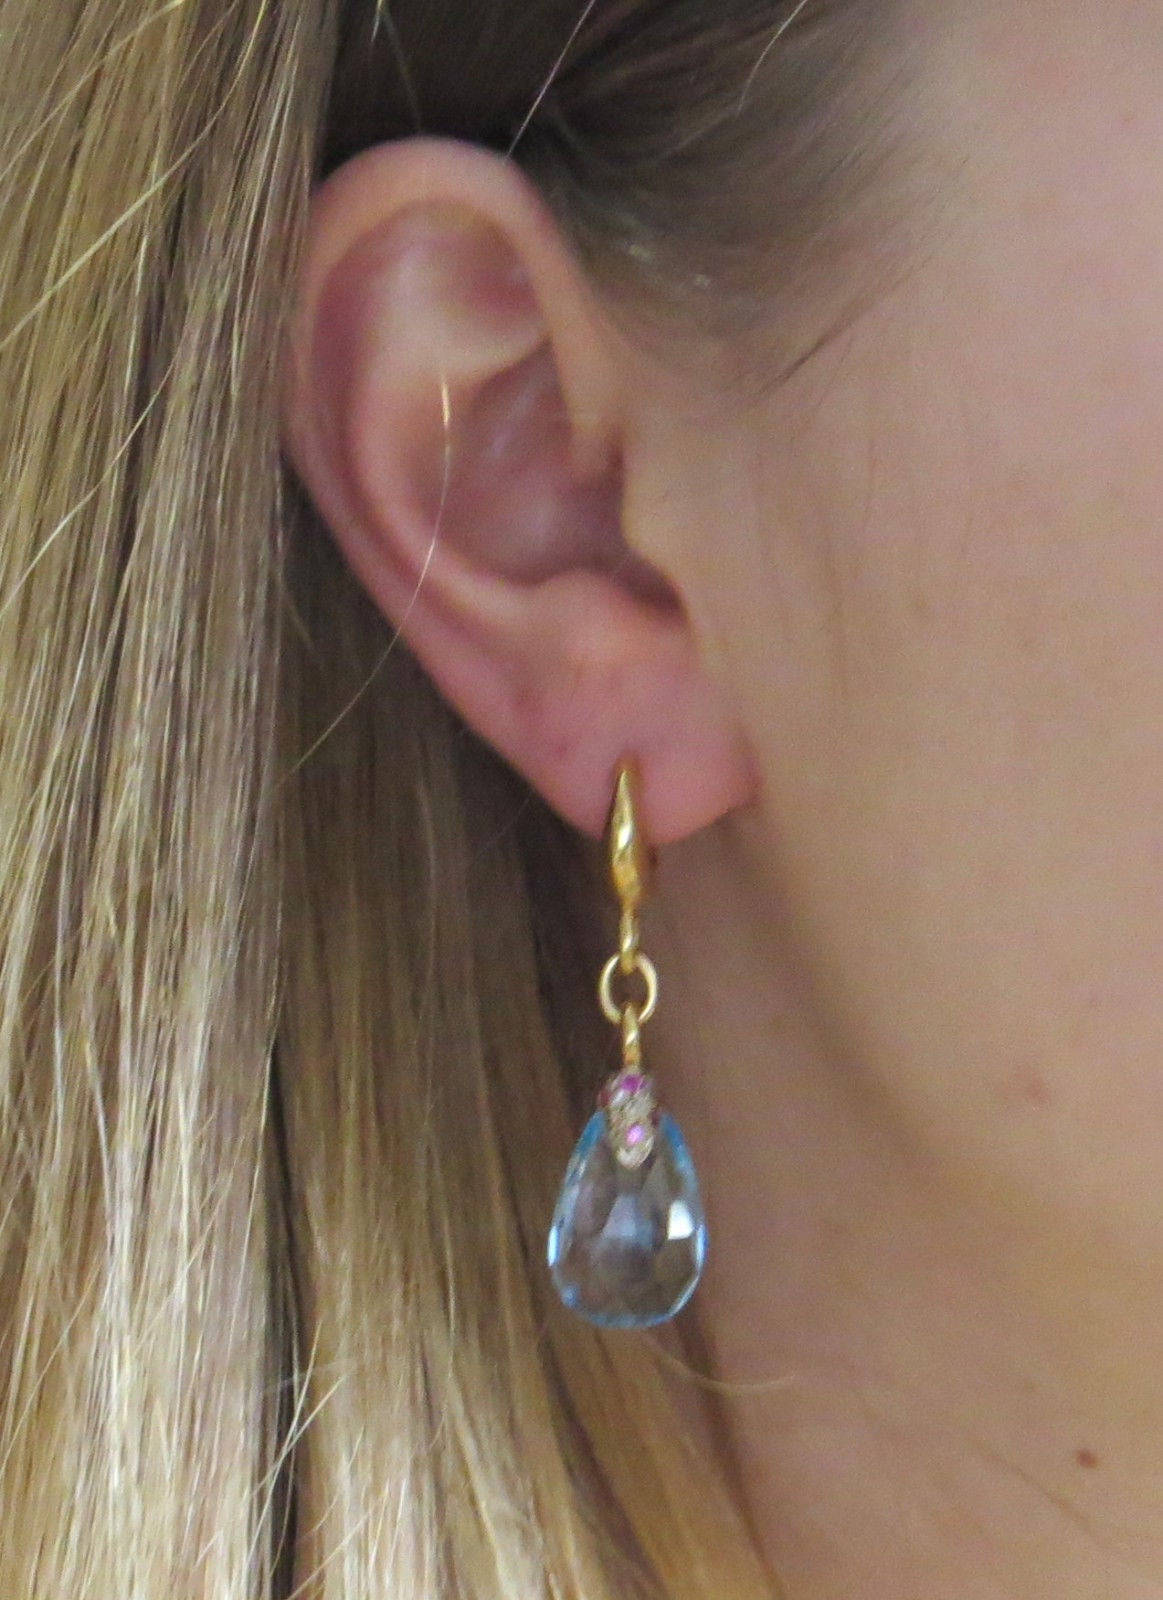 18k gold drop earrings by Pomellato, designed for Pin Up collection, featuring blue topaz teardrops, set with diamonds and sapphires. Earrings measure 47mm x 13mm. Marked Pomellato and 750. Weight - 16 grams